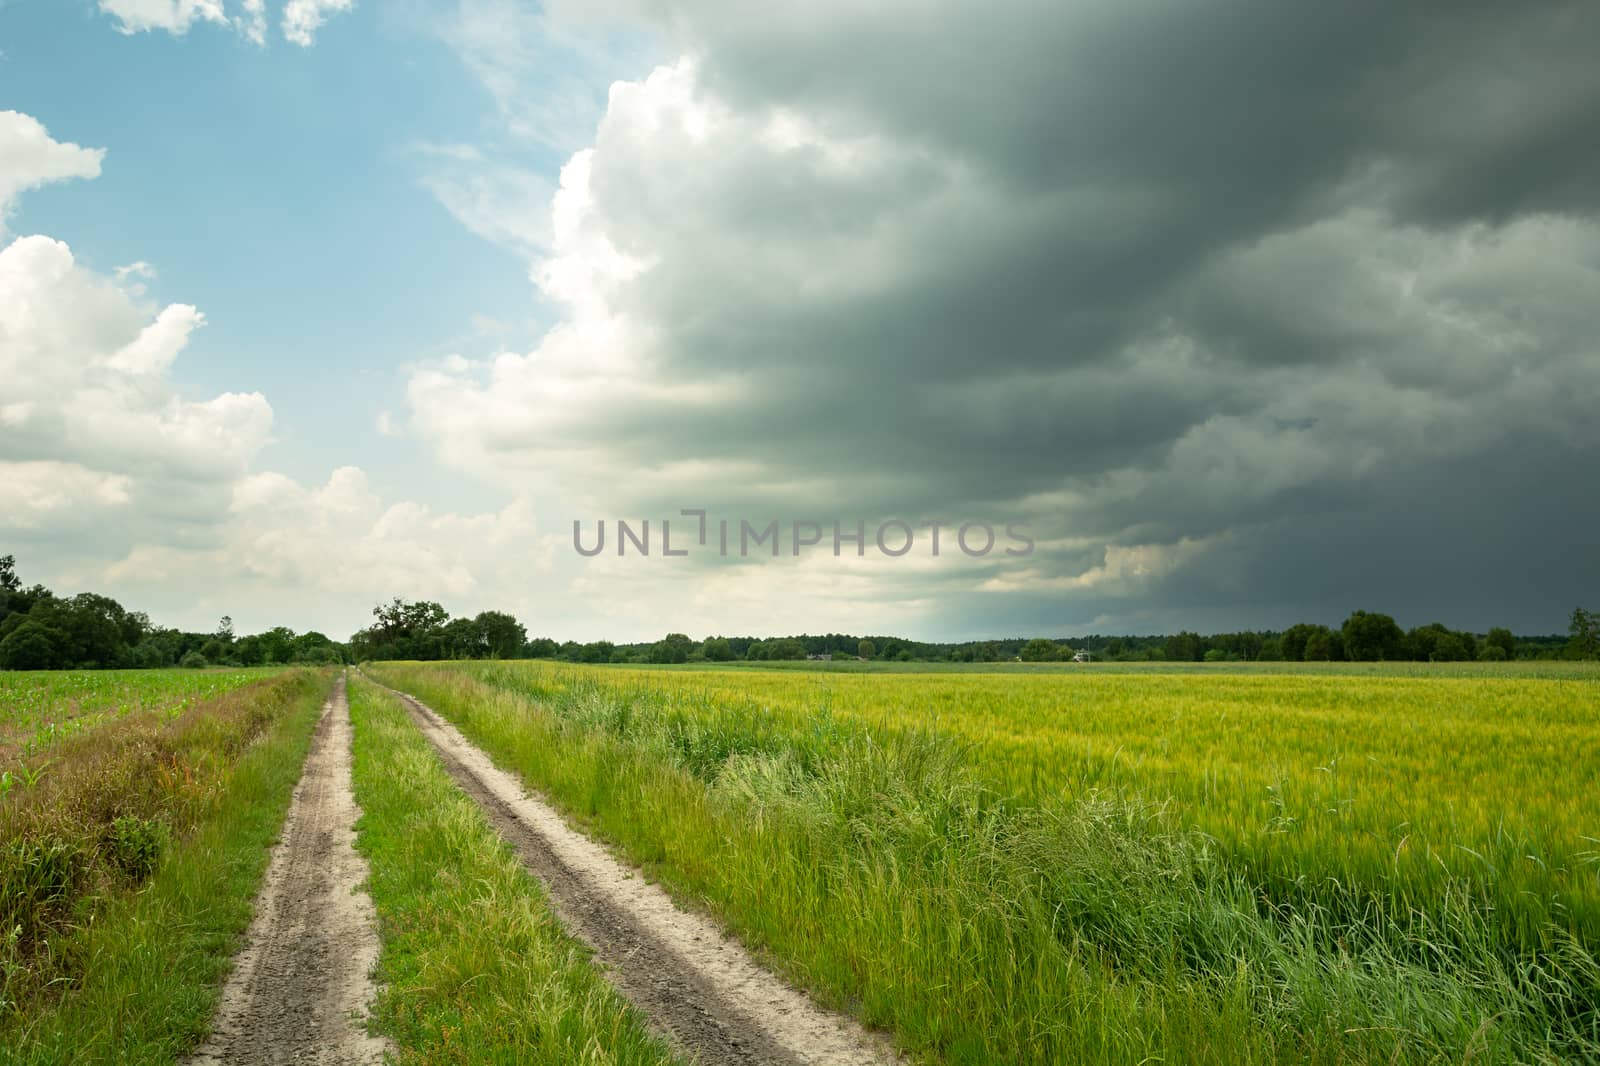 Dark storm clouds and dirt road next to green grain, summer cloudy day